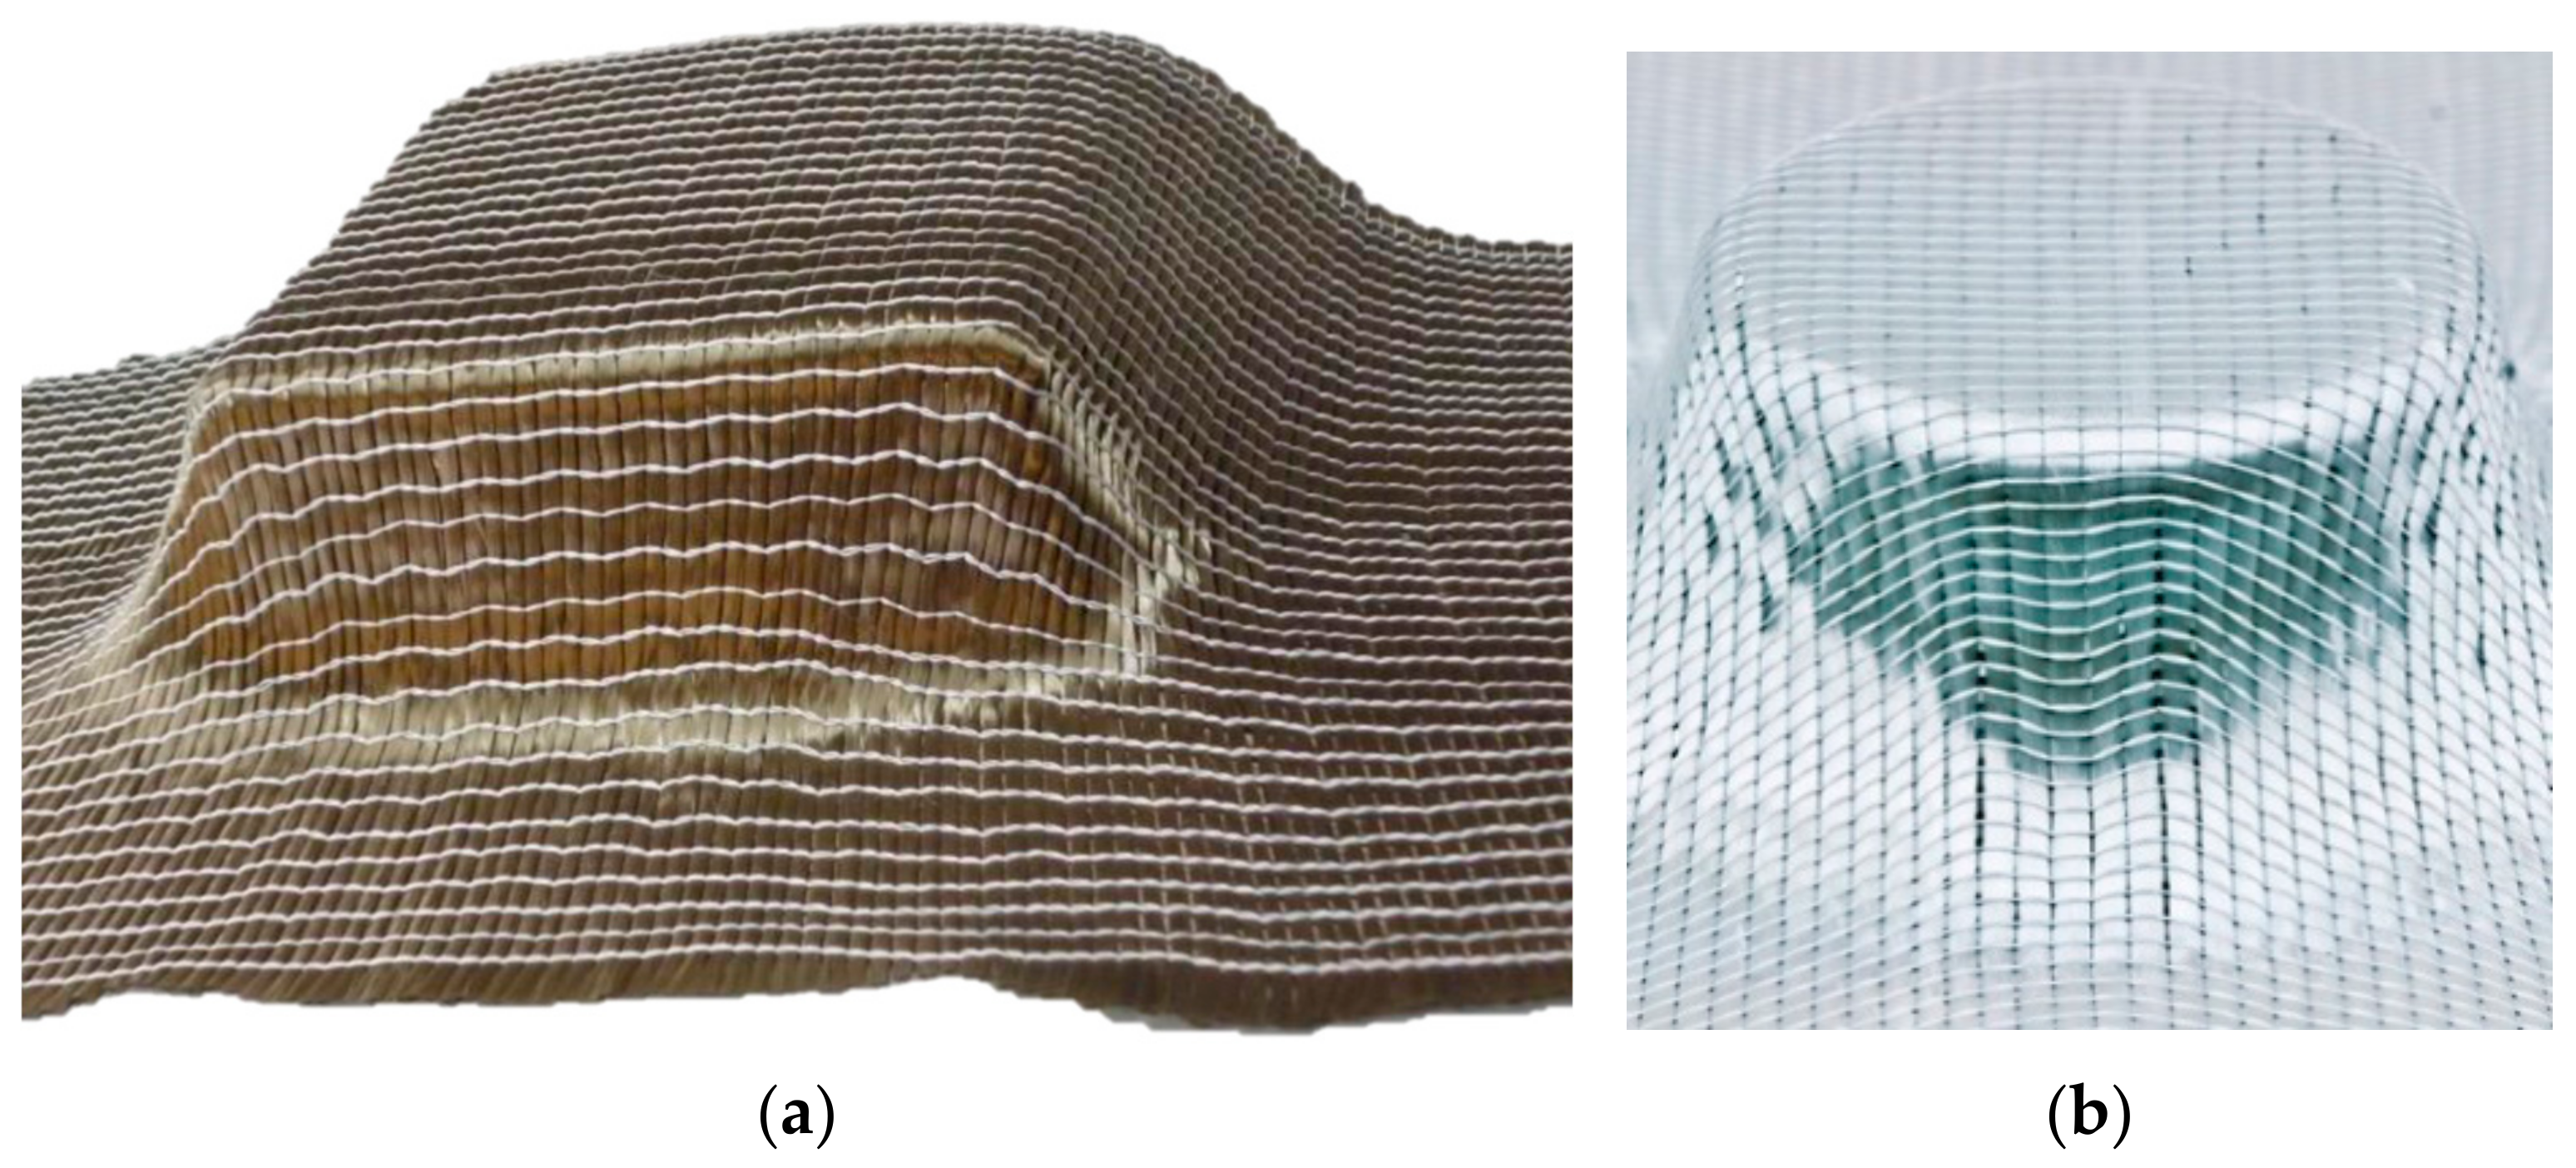 The technical face view of the 1×1 single-bar warp-knitted fabric.